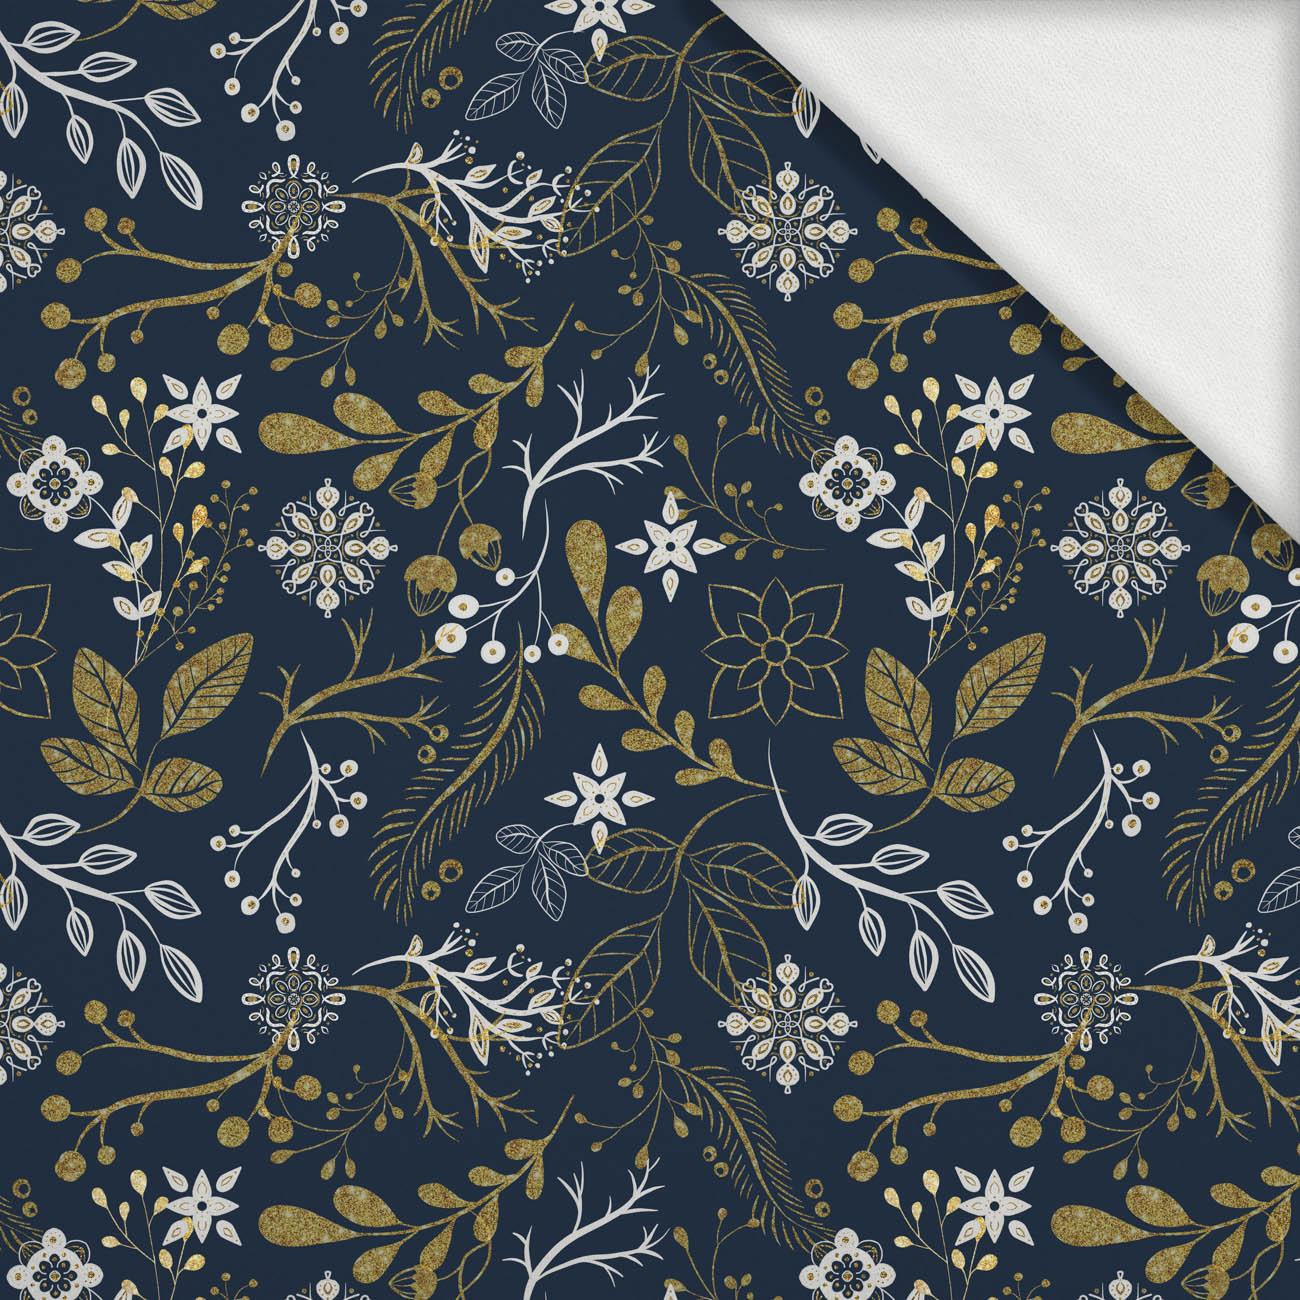 FOLK FLORAL pat. 1 / gold (FOLK FOREST) - looped knit fabric with elastane ITY